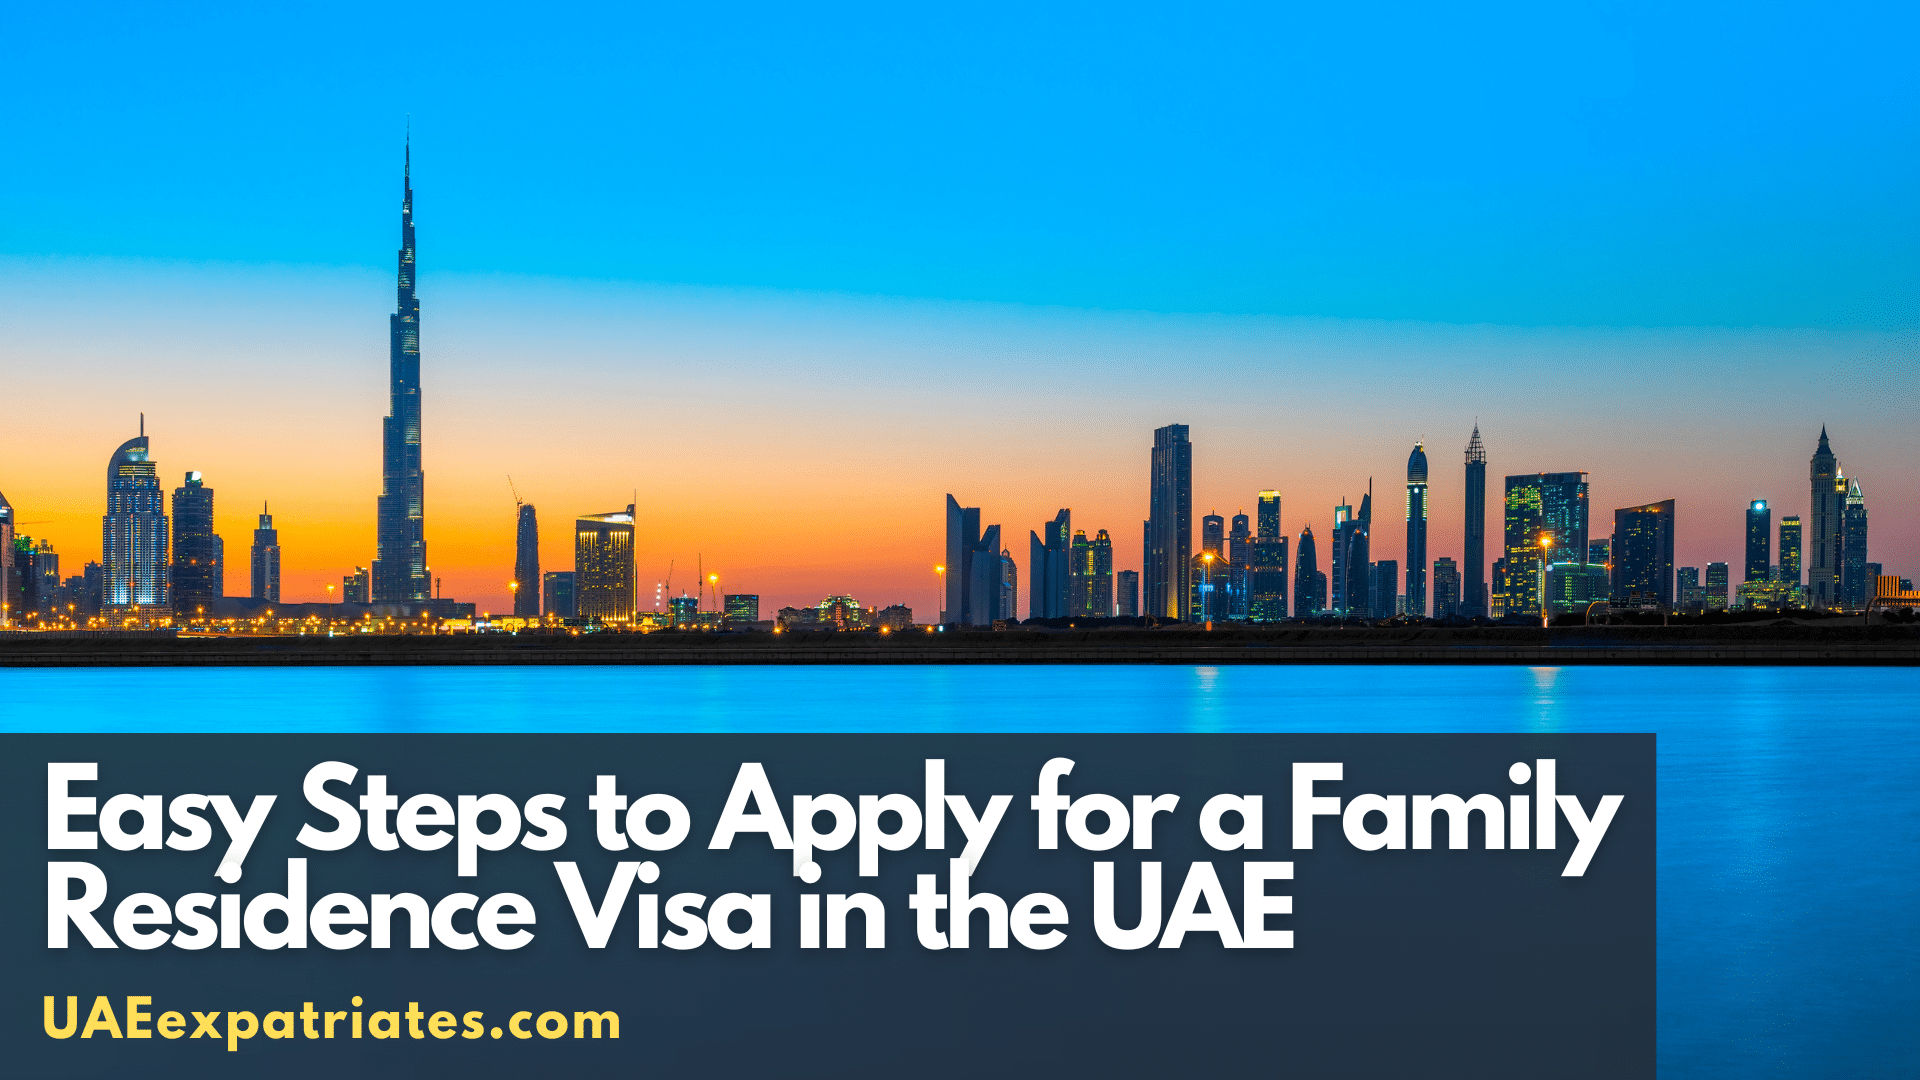 Easy Steps to Apply for a Family Residence Visa in the UAE